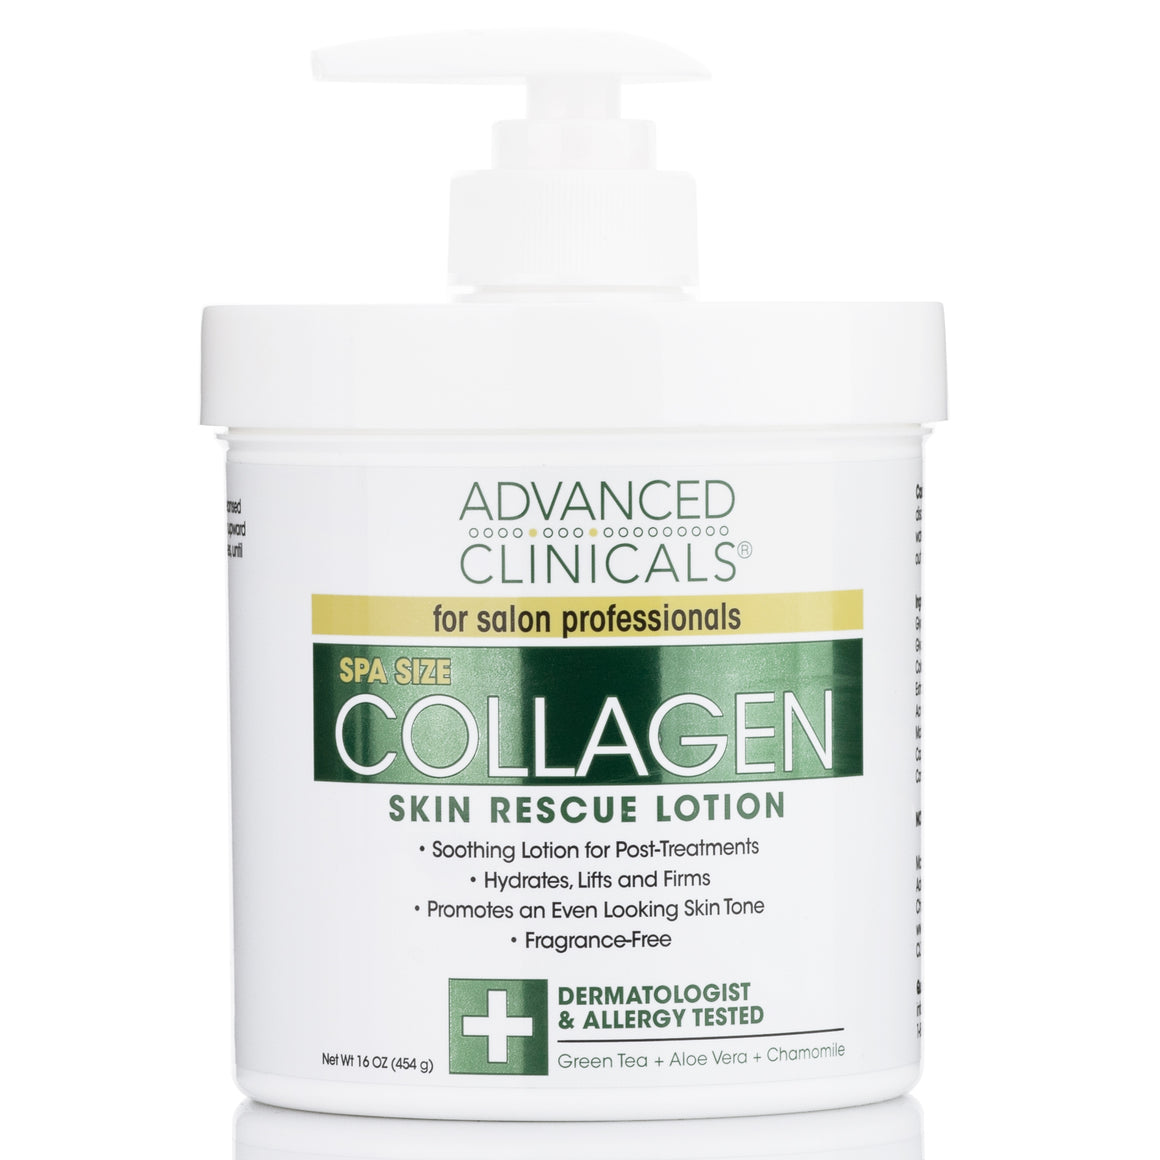 Collagen Skin Rescue Lotion (No Added Fragrance)